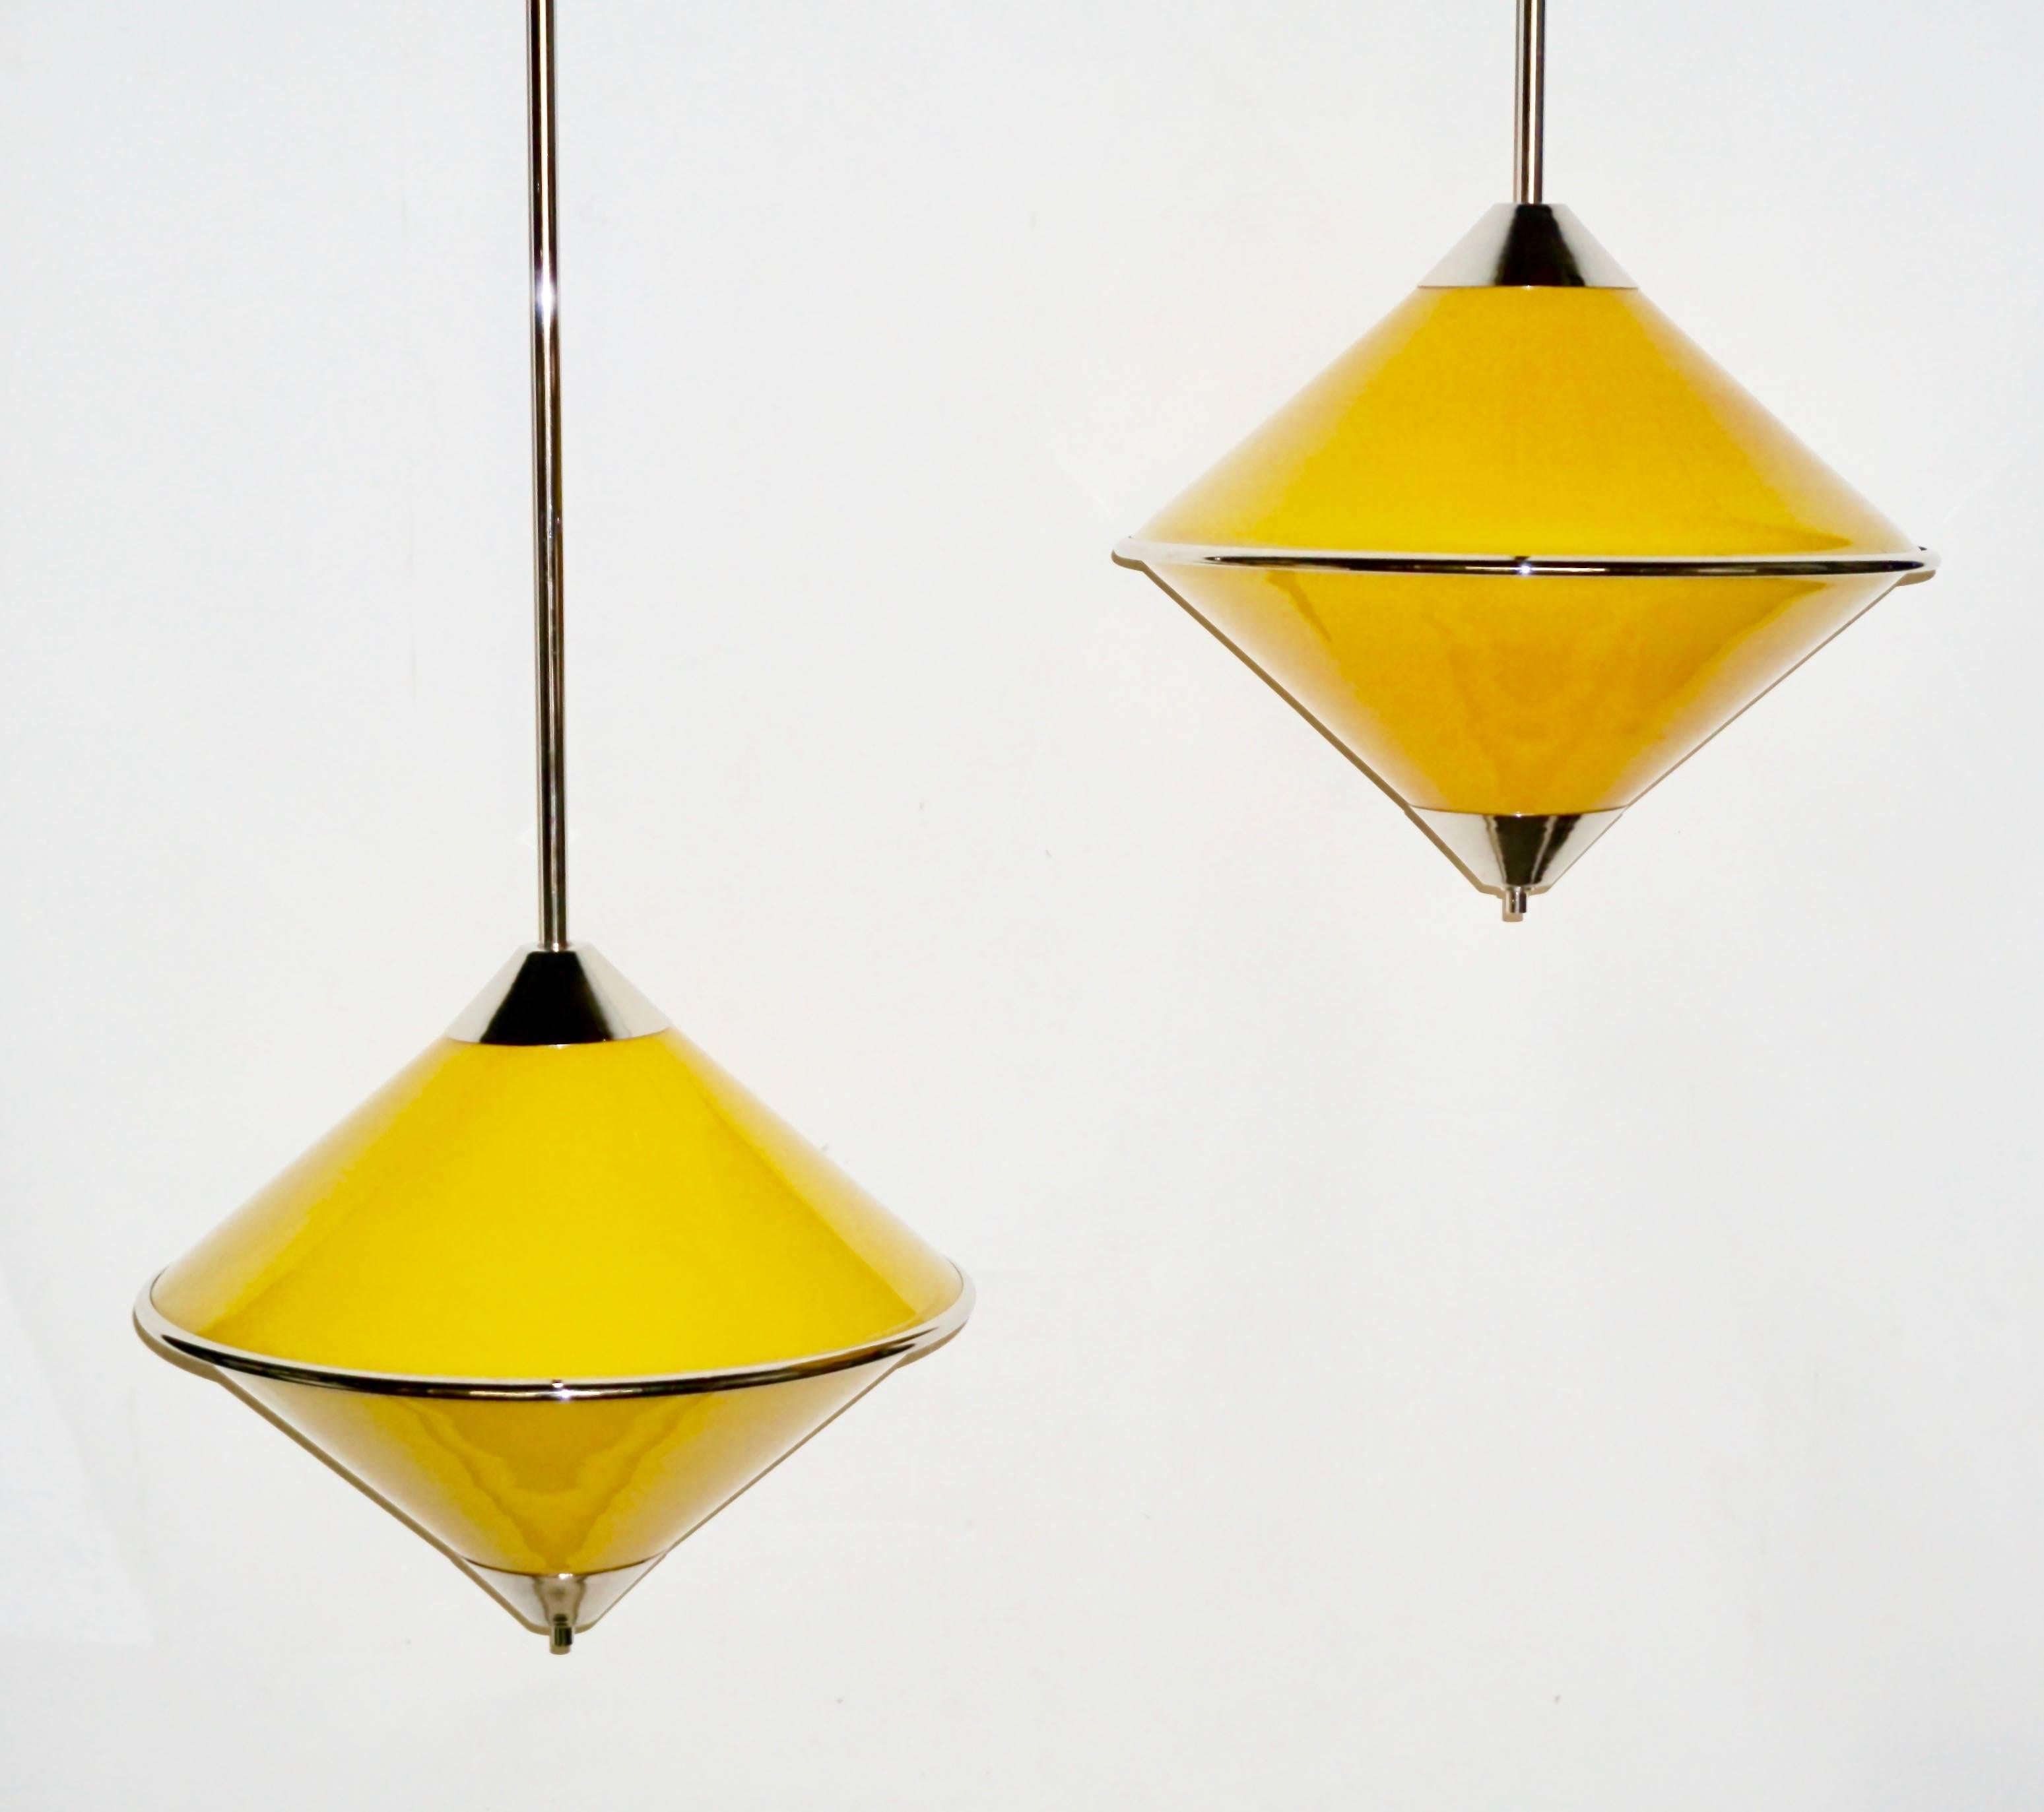 A vintage Italian pair of joyful pendant lamps by Fratelli Toso, entirely handcrafted, in high quality blown Murano glass of interesting enamel yellow color overlaid in white to produce plenty of light when lit. The rhombus shape is highlighted by a